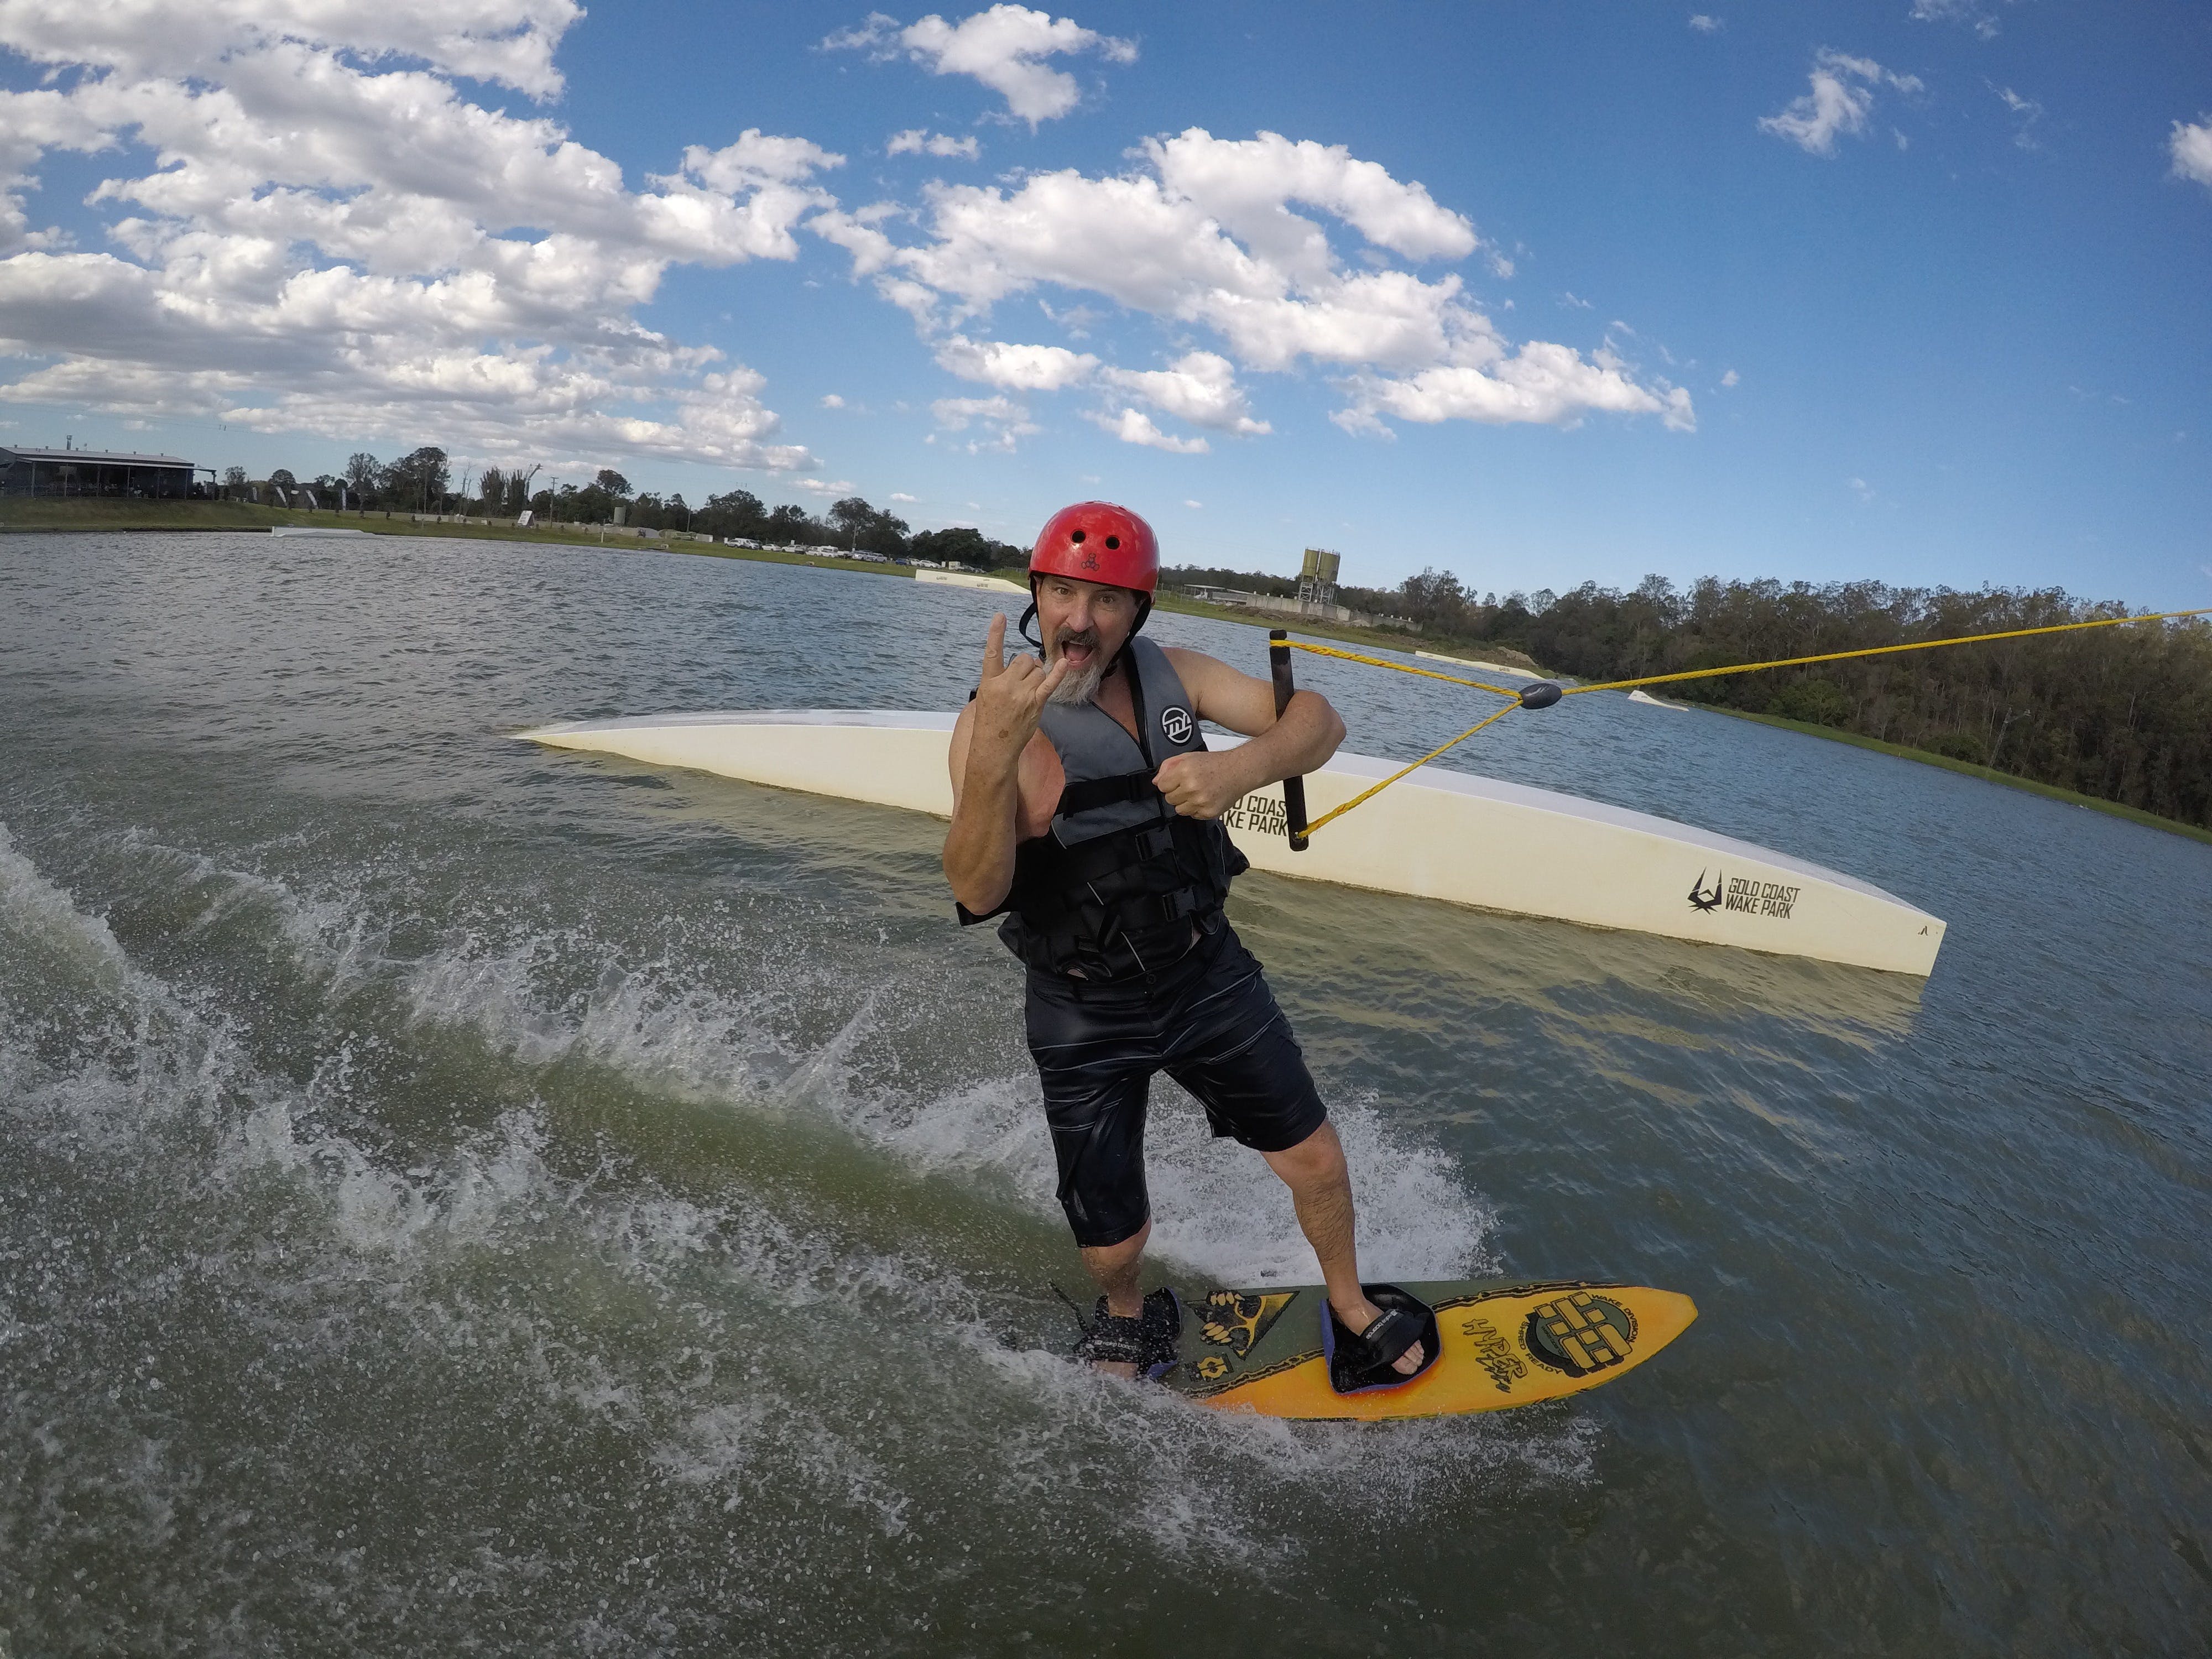 GC Wake Park - Accommodation in Surfers Paradise